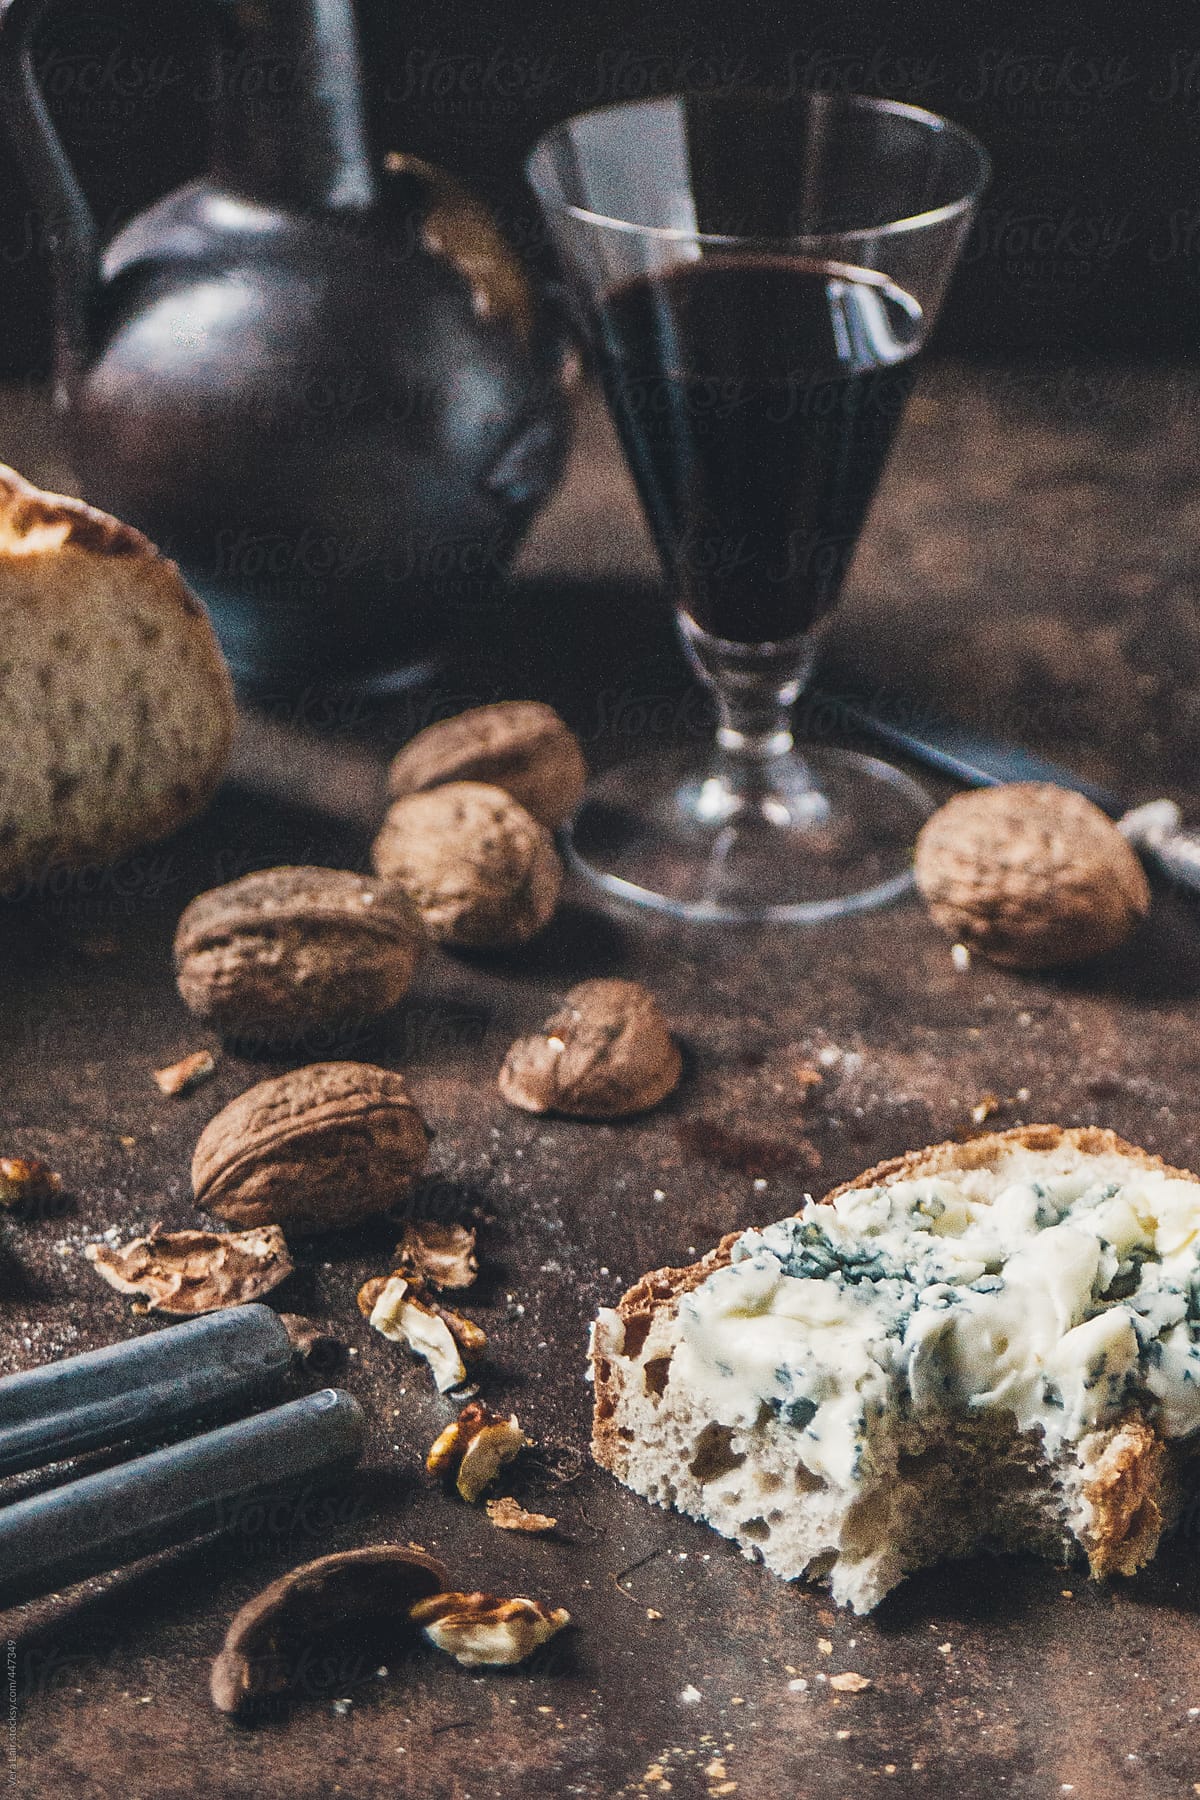 Slice of bread with blue cheese, wine and wallnuts